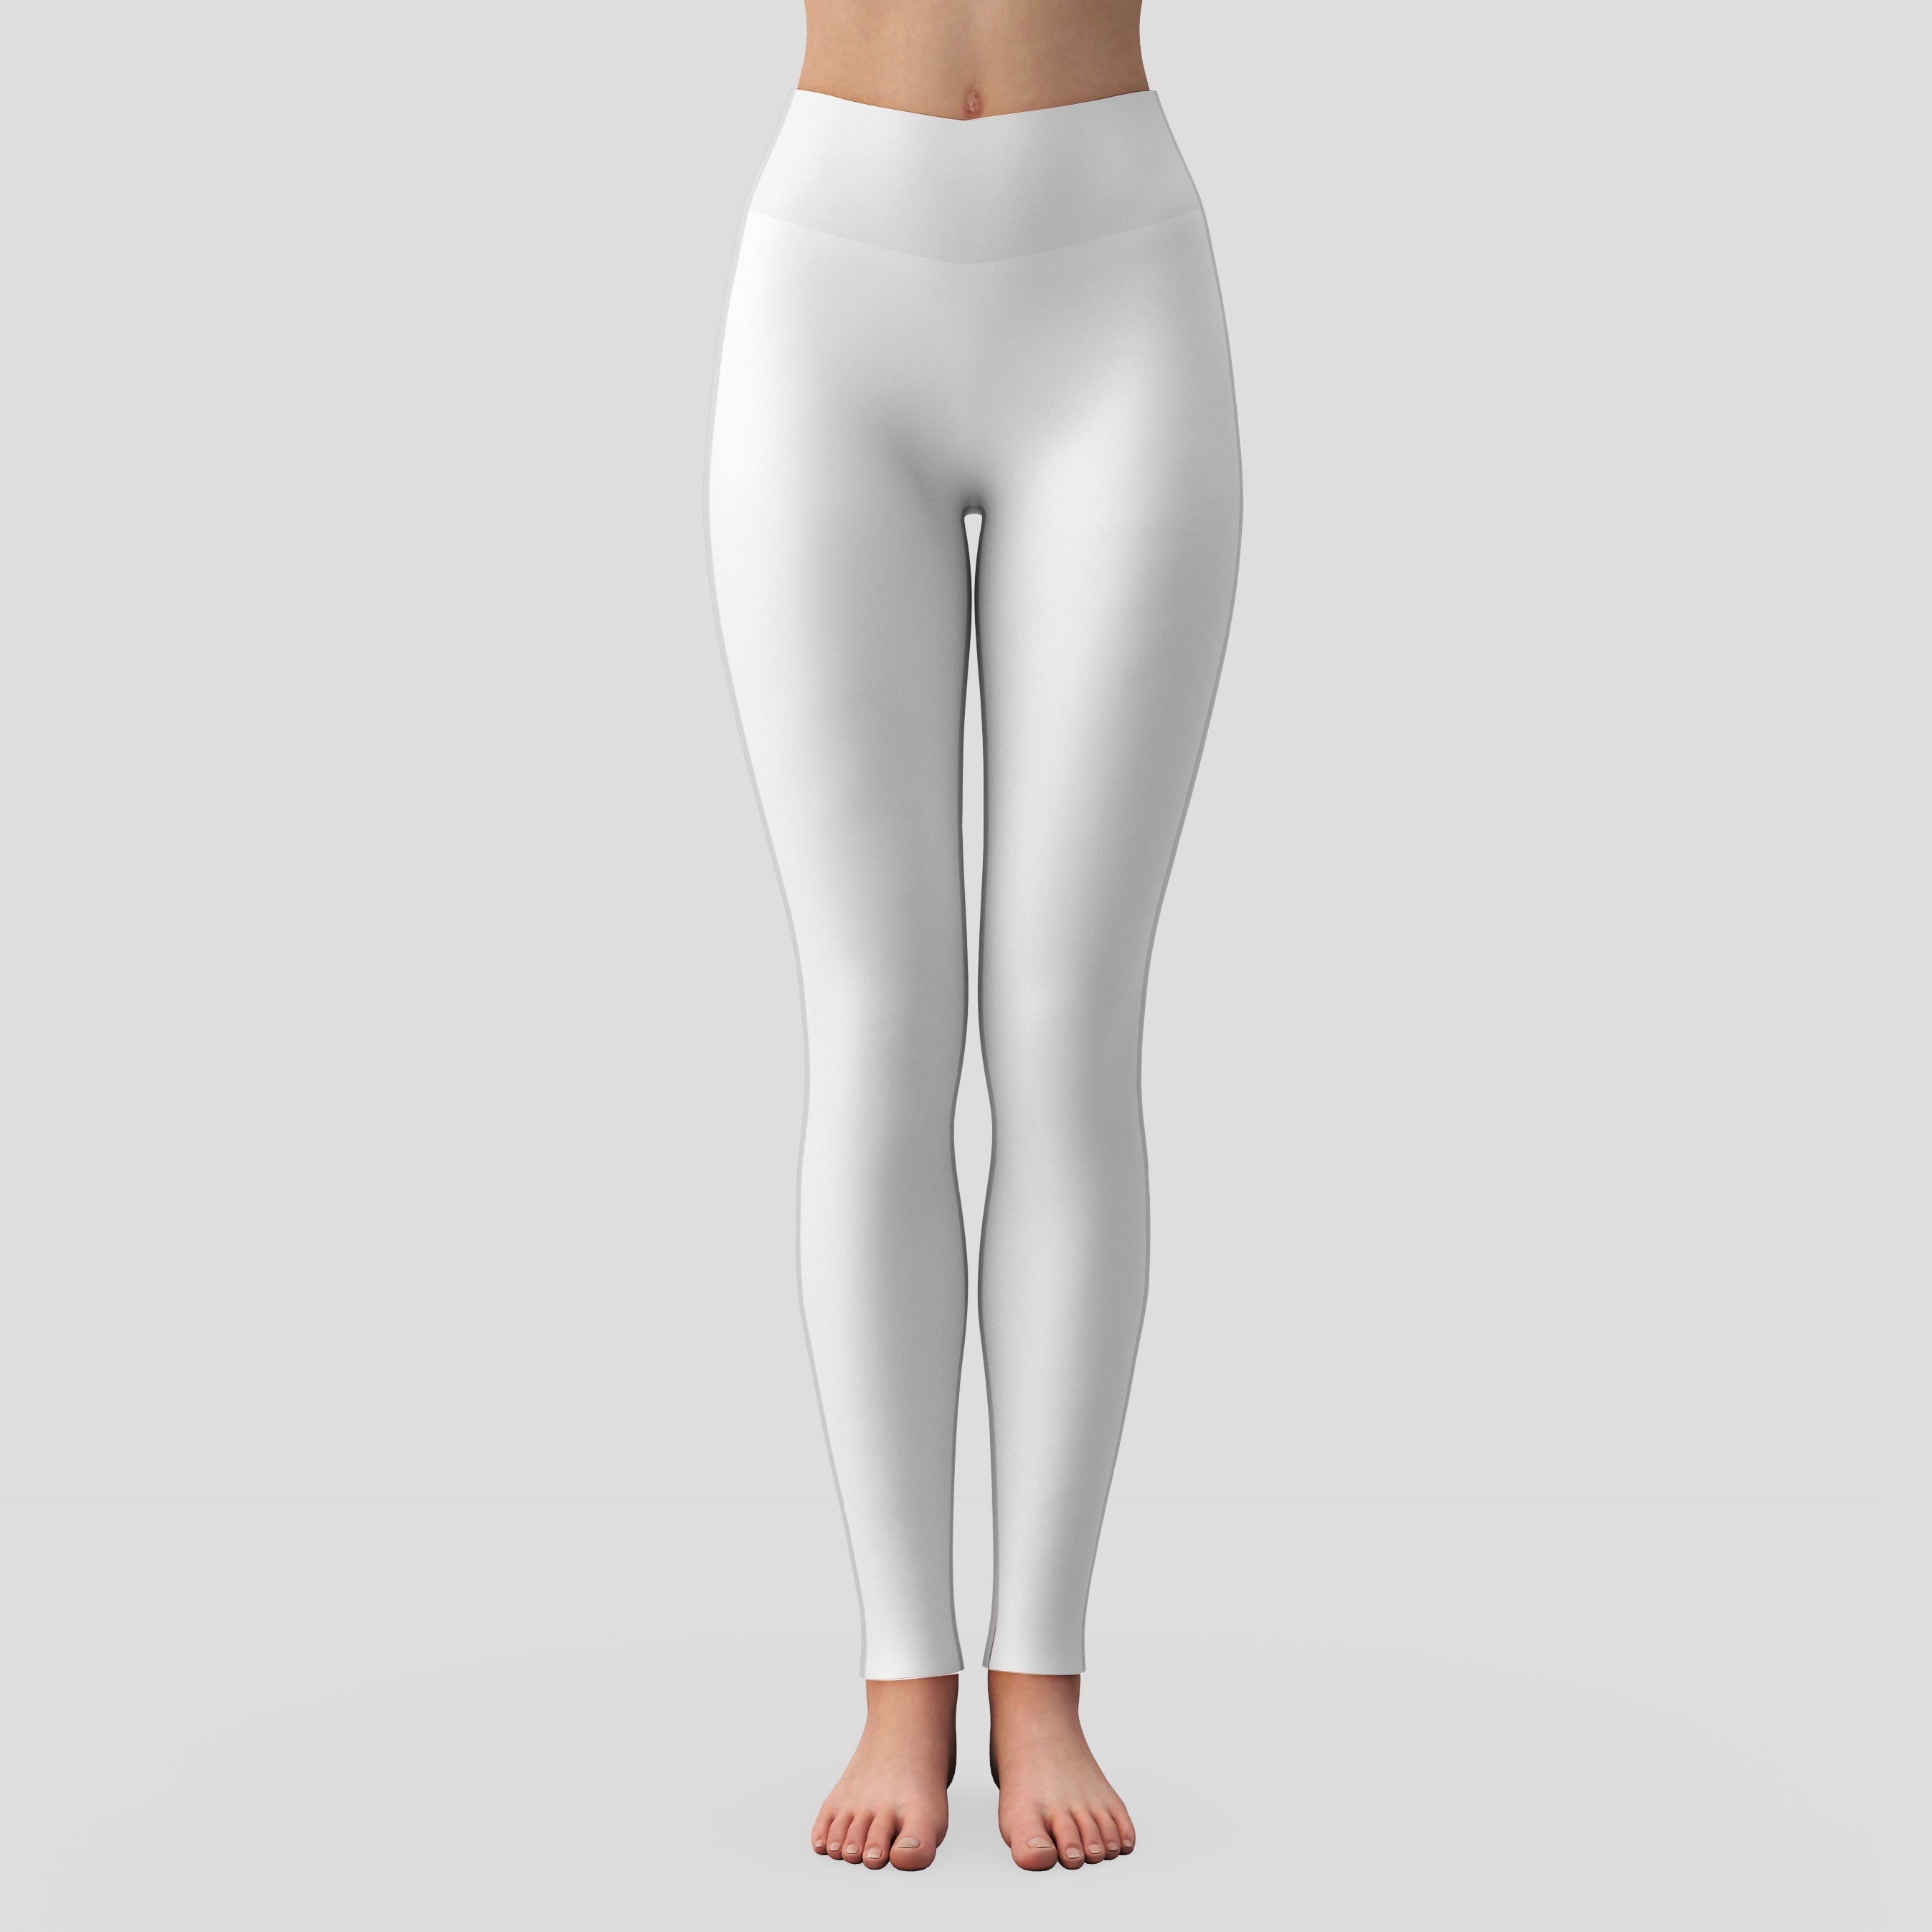 High Quality Polyester Fabric Women's Leggings For All Occasions